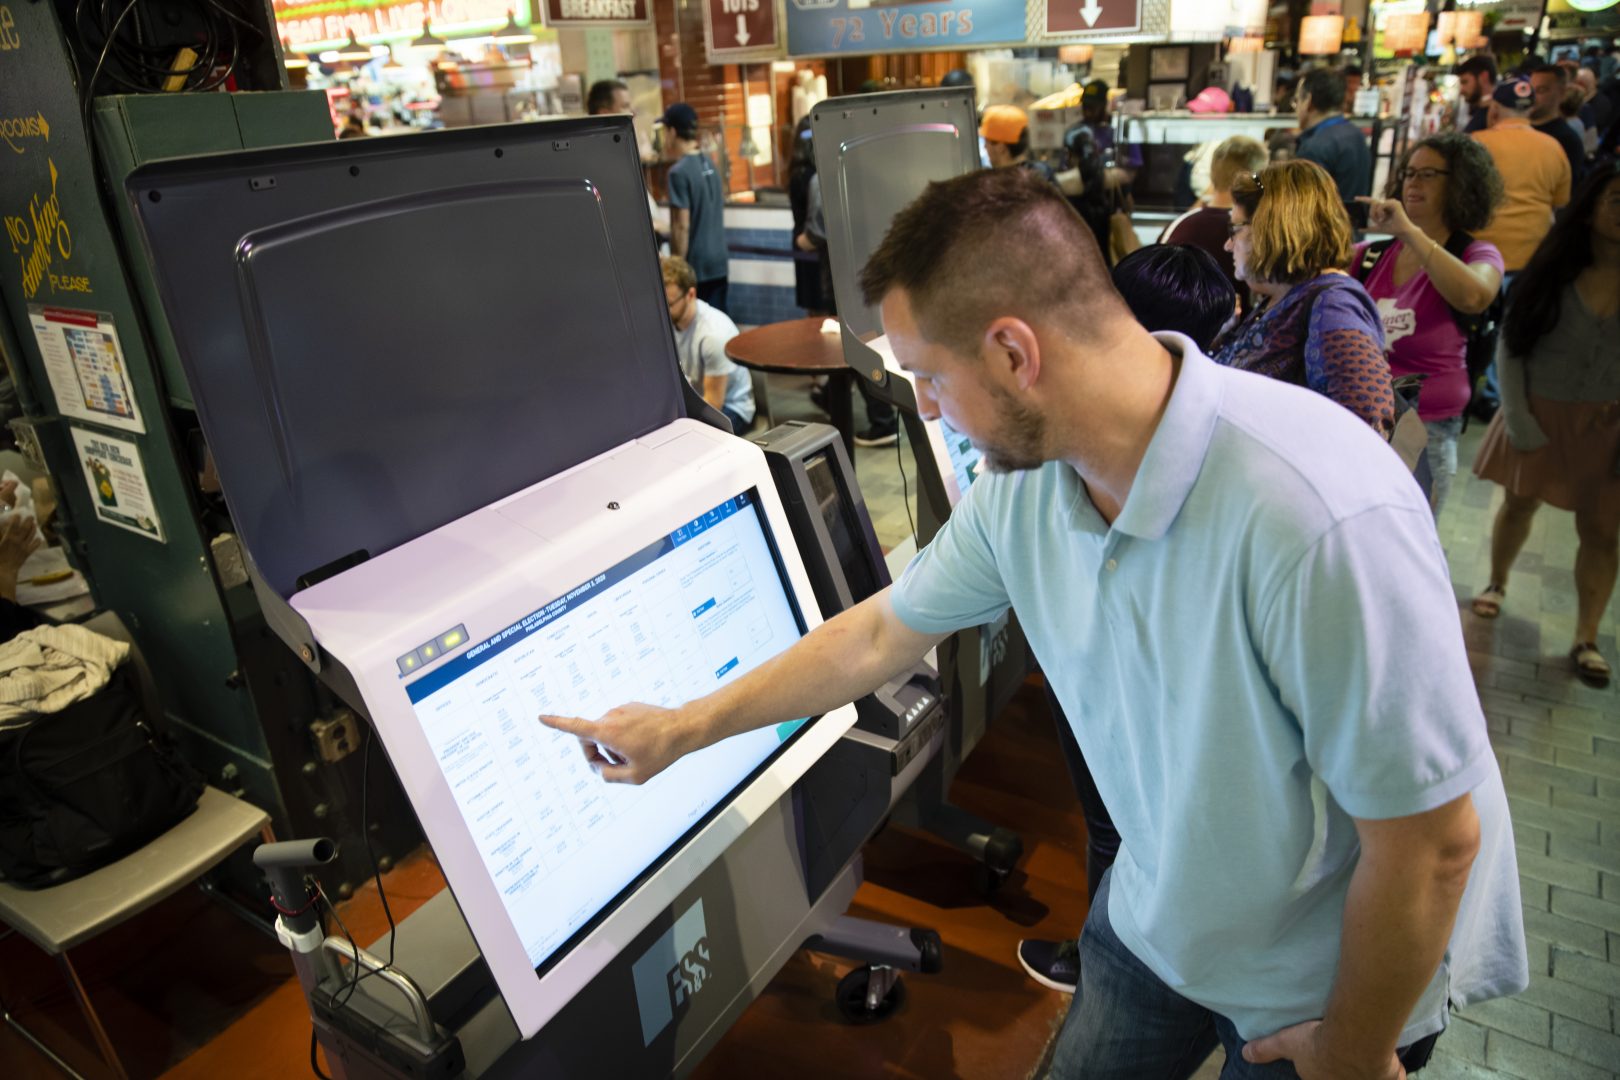 Steve Marcinkus, an Investigator with the Office of the City Commissioners, demonstrates the ExpressVote XL voting machine at the Reading Terminal Market in Philadelphia, Thursday, June 13, 2019.